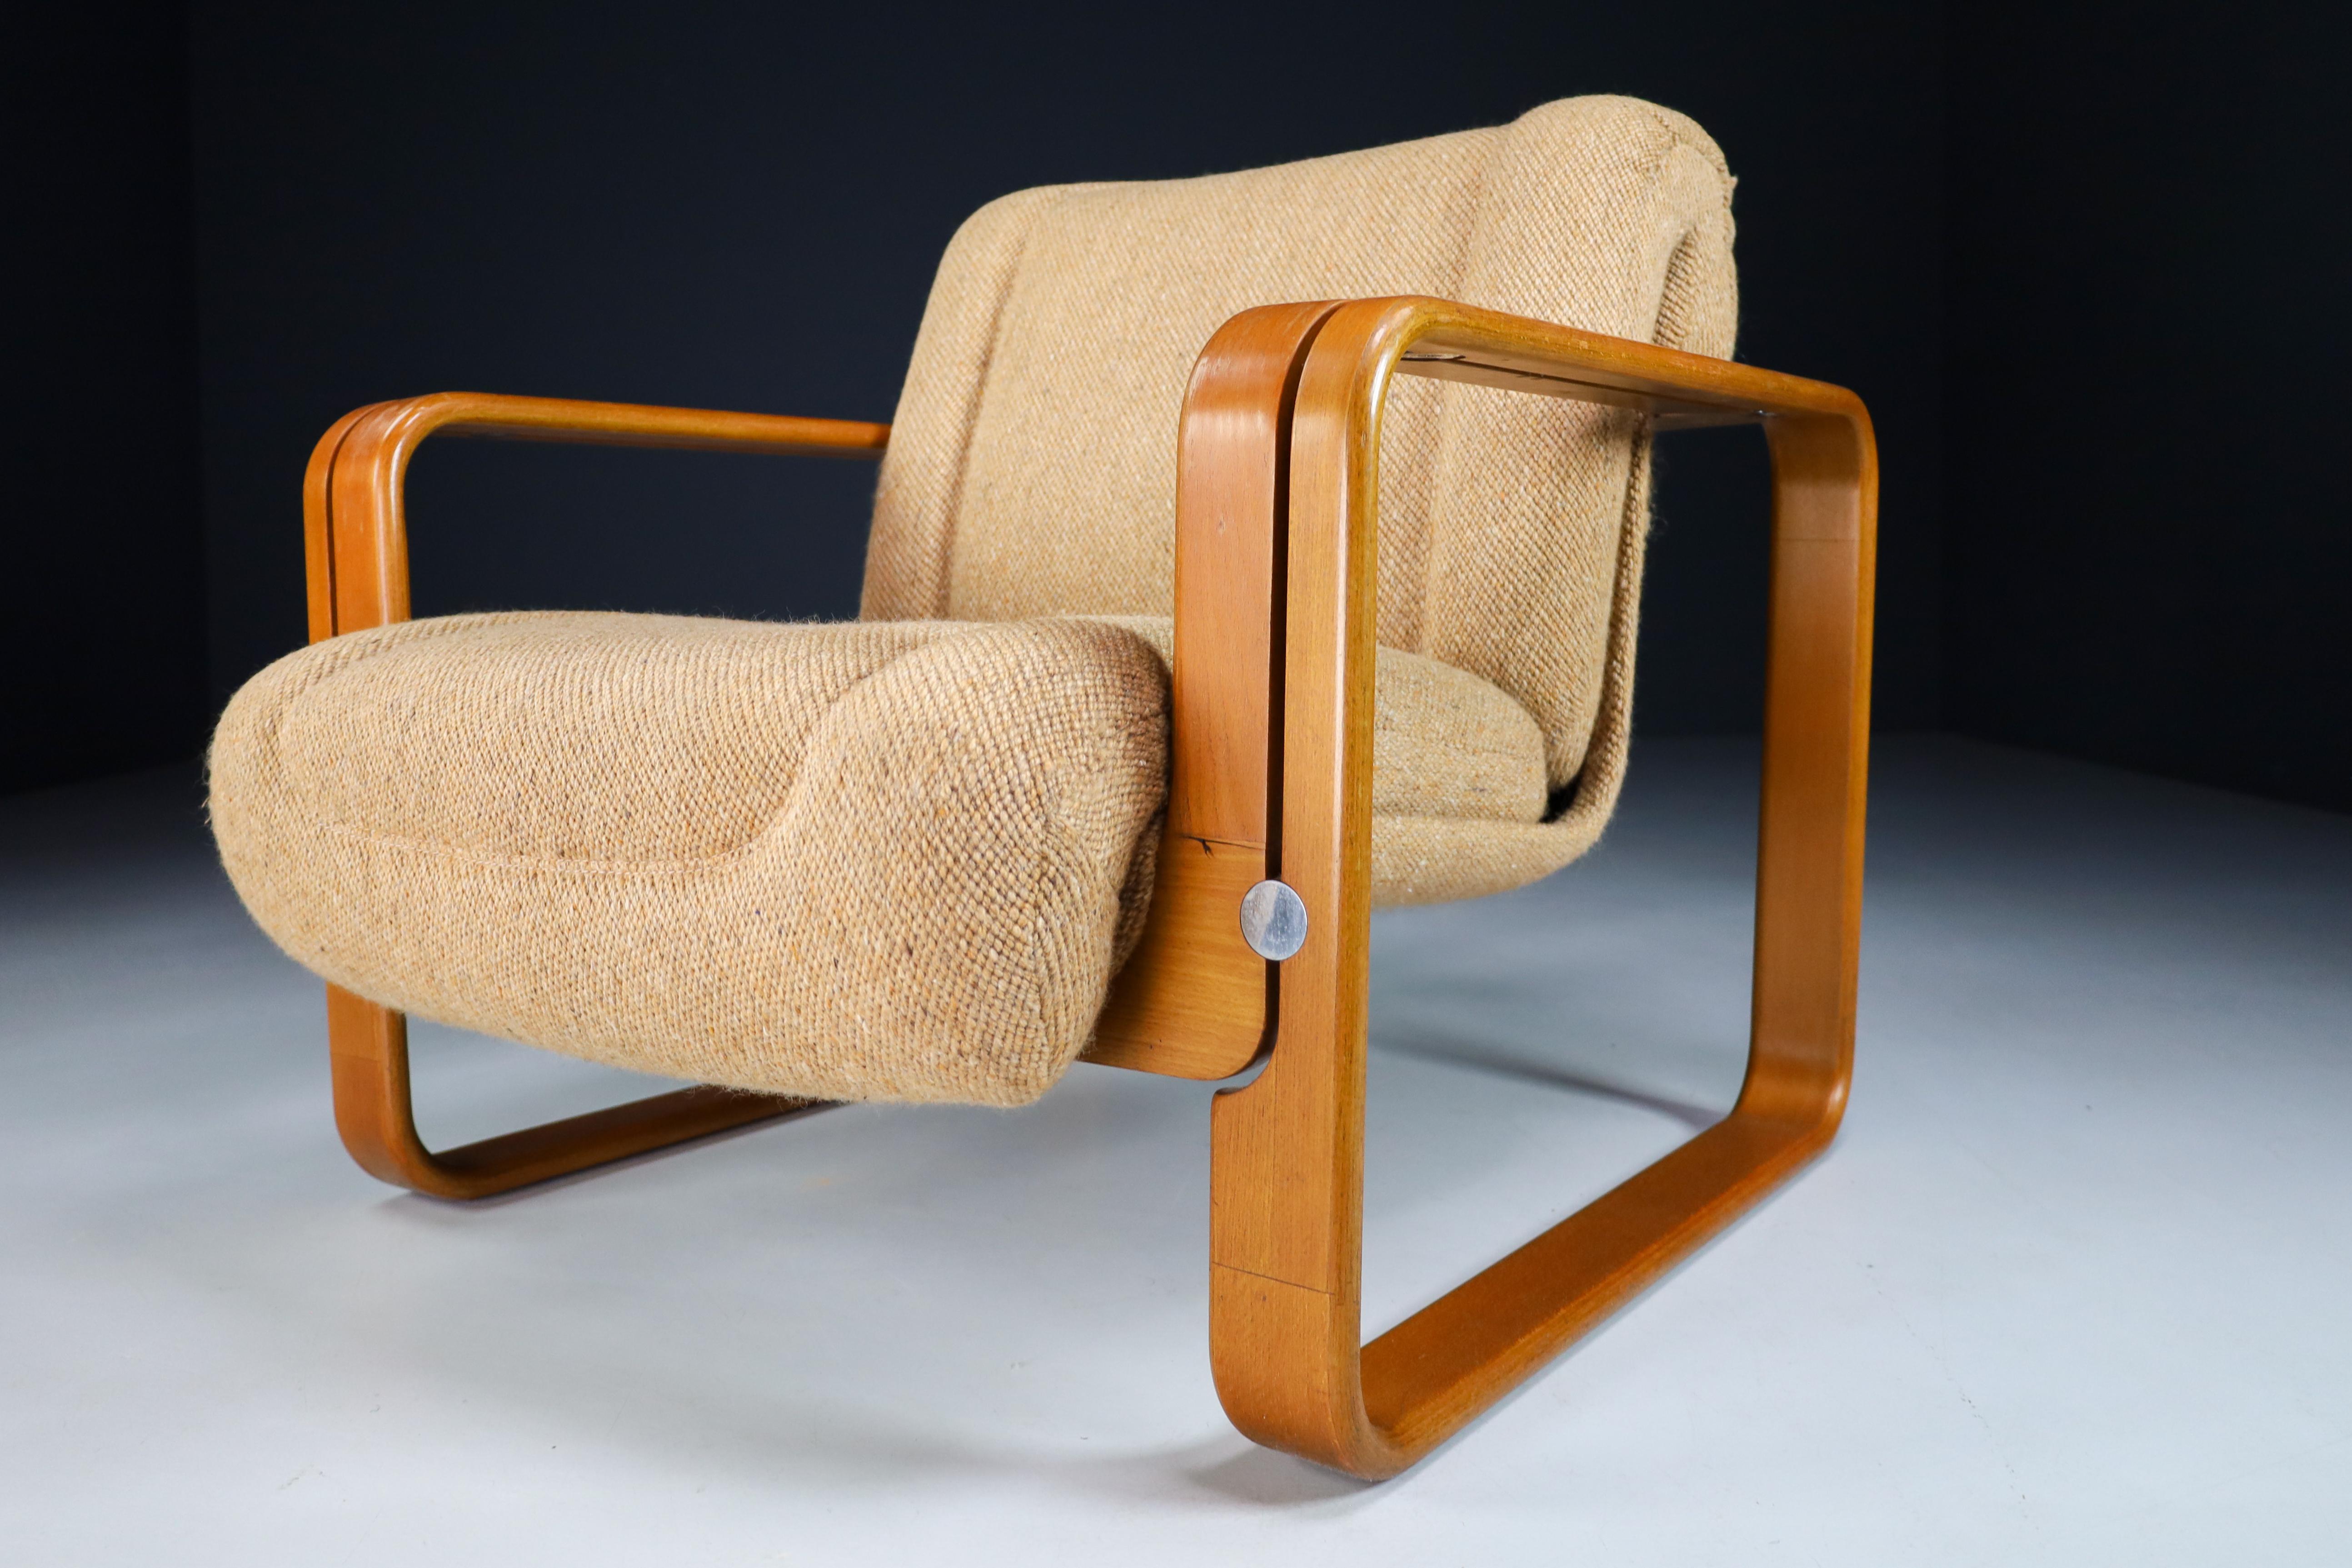 This armchair were designed by the award-winning architect Jan Bocan, possibly produced by Thonet or Ton. The armchair is in original good condition and has original 1970s upholstery and have nice bentwood frame with a very nice patina .The original